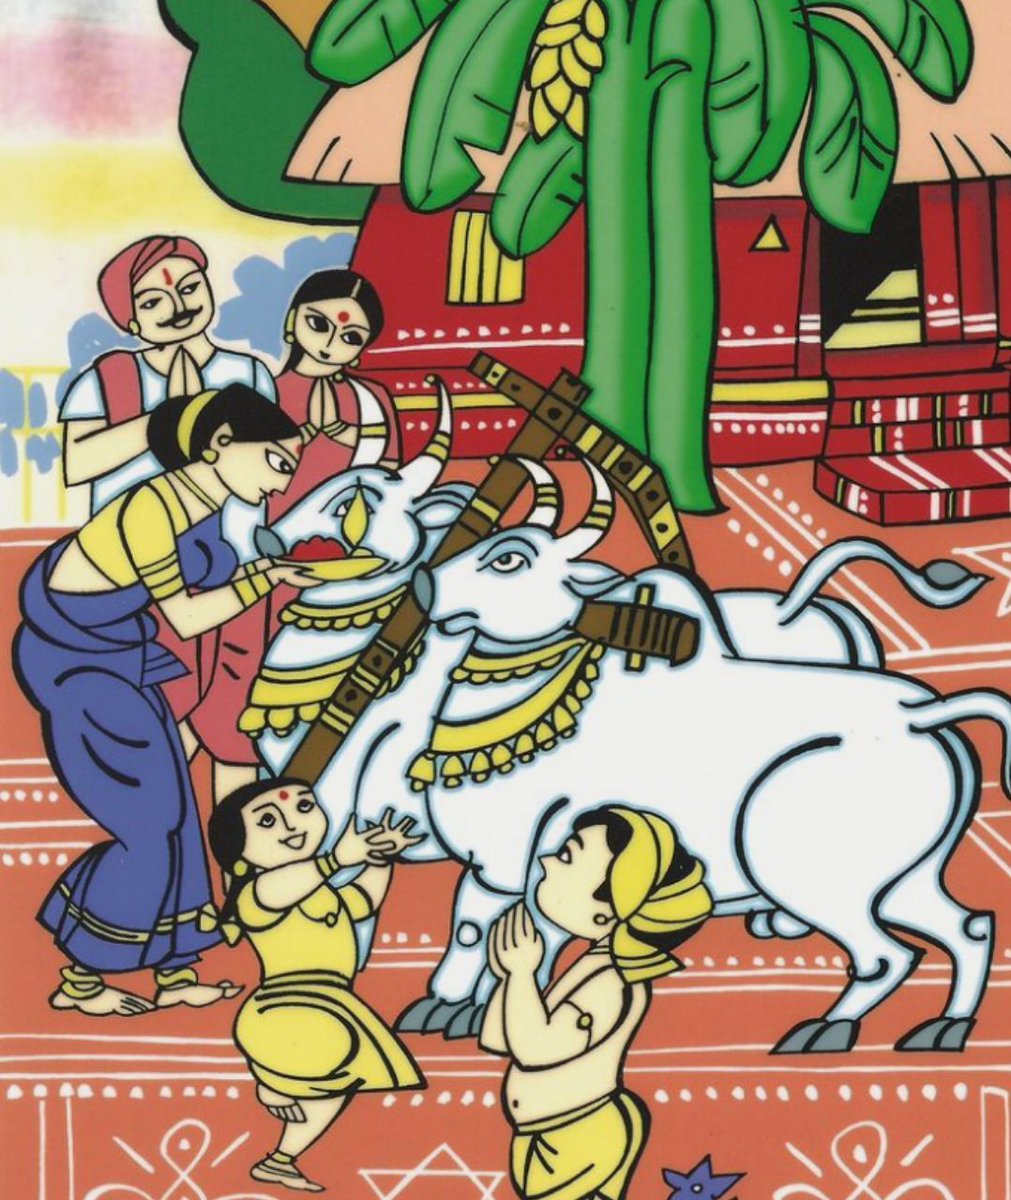 Vedic scriptures glorify the Cow and explain the importance of serving the cow. Even Lord Krishna is also known as Govinda and Gopala that means friend and protector of cows.As we know the beauty of Vedic Culture, we honour our parents, teachers as the token of gratitude.